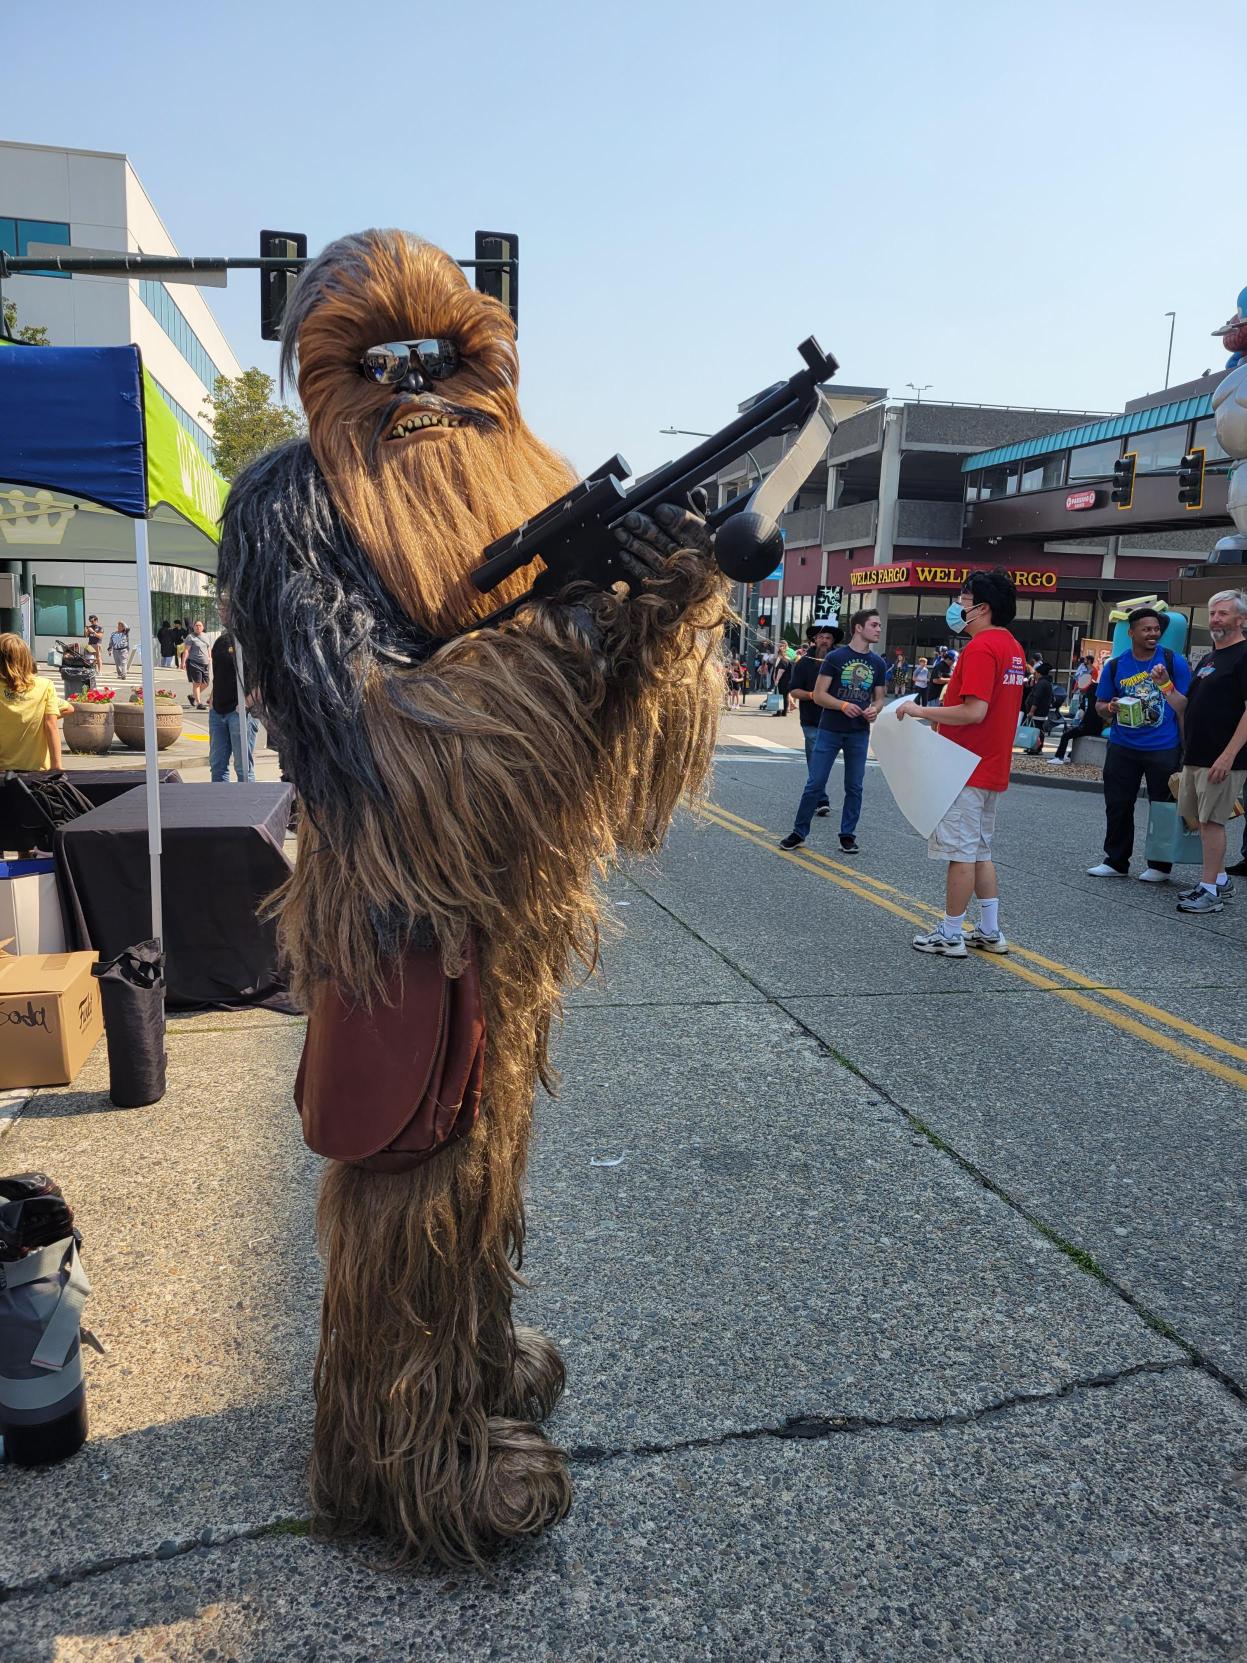 Chewbacca: Chewbacca stands guard on the street. A long-time Funatic dresses up for the part.